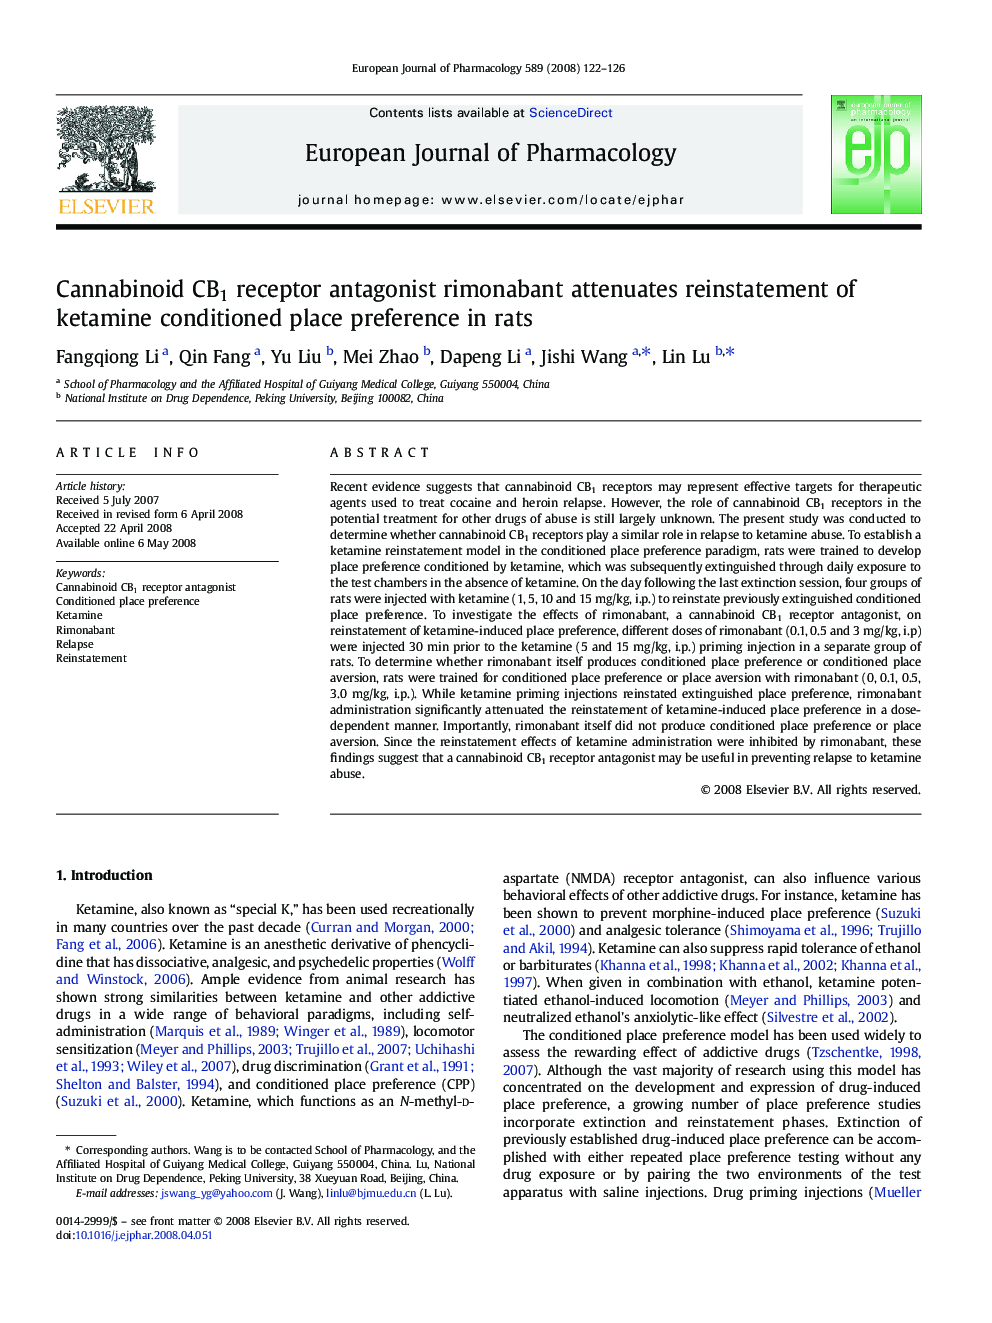 Cannabinoid CB1 receptor antagonist rimonabant attenuates reinstatement of ketamine conditioned place preference in rats